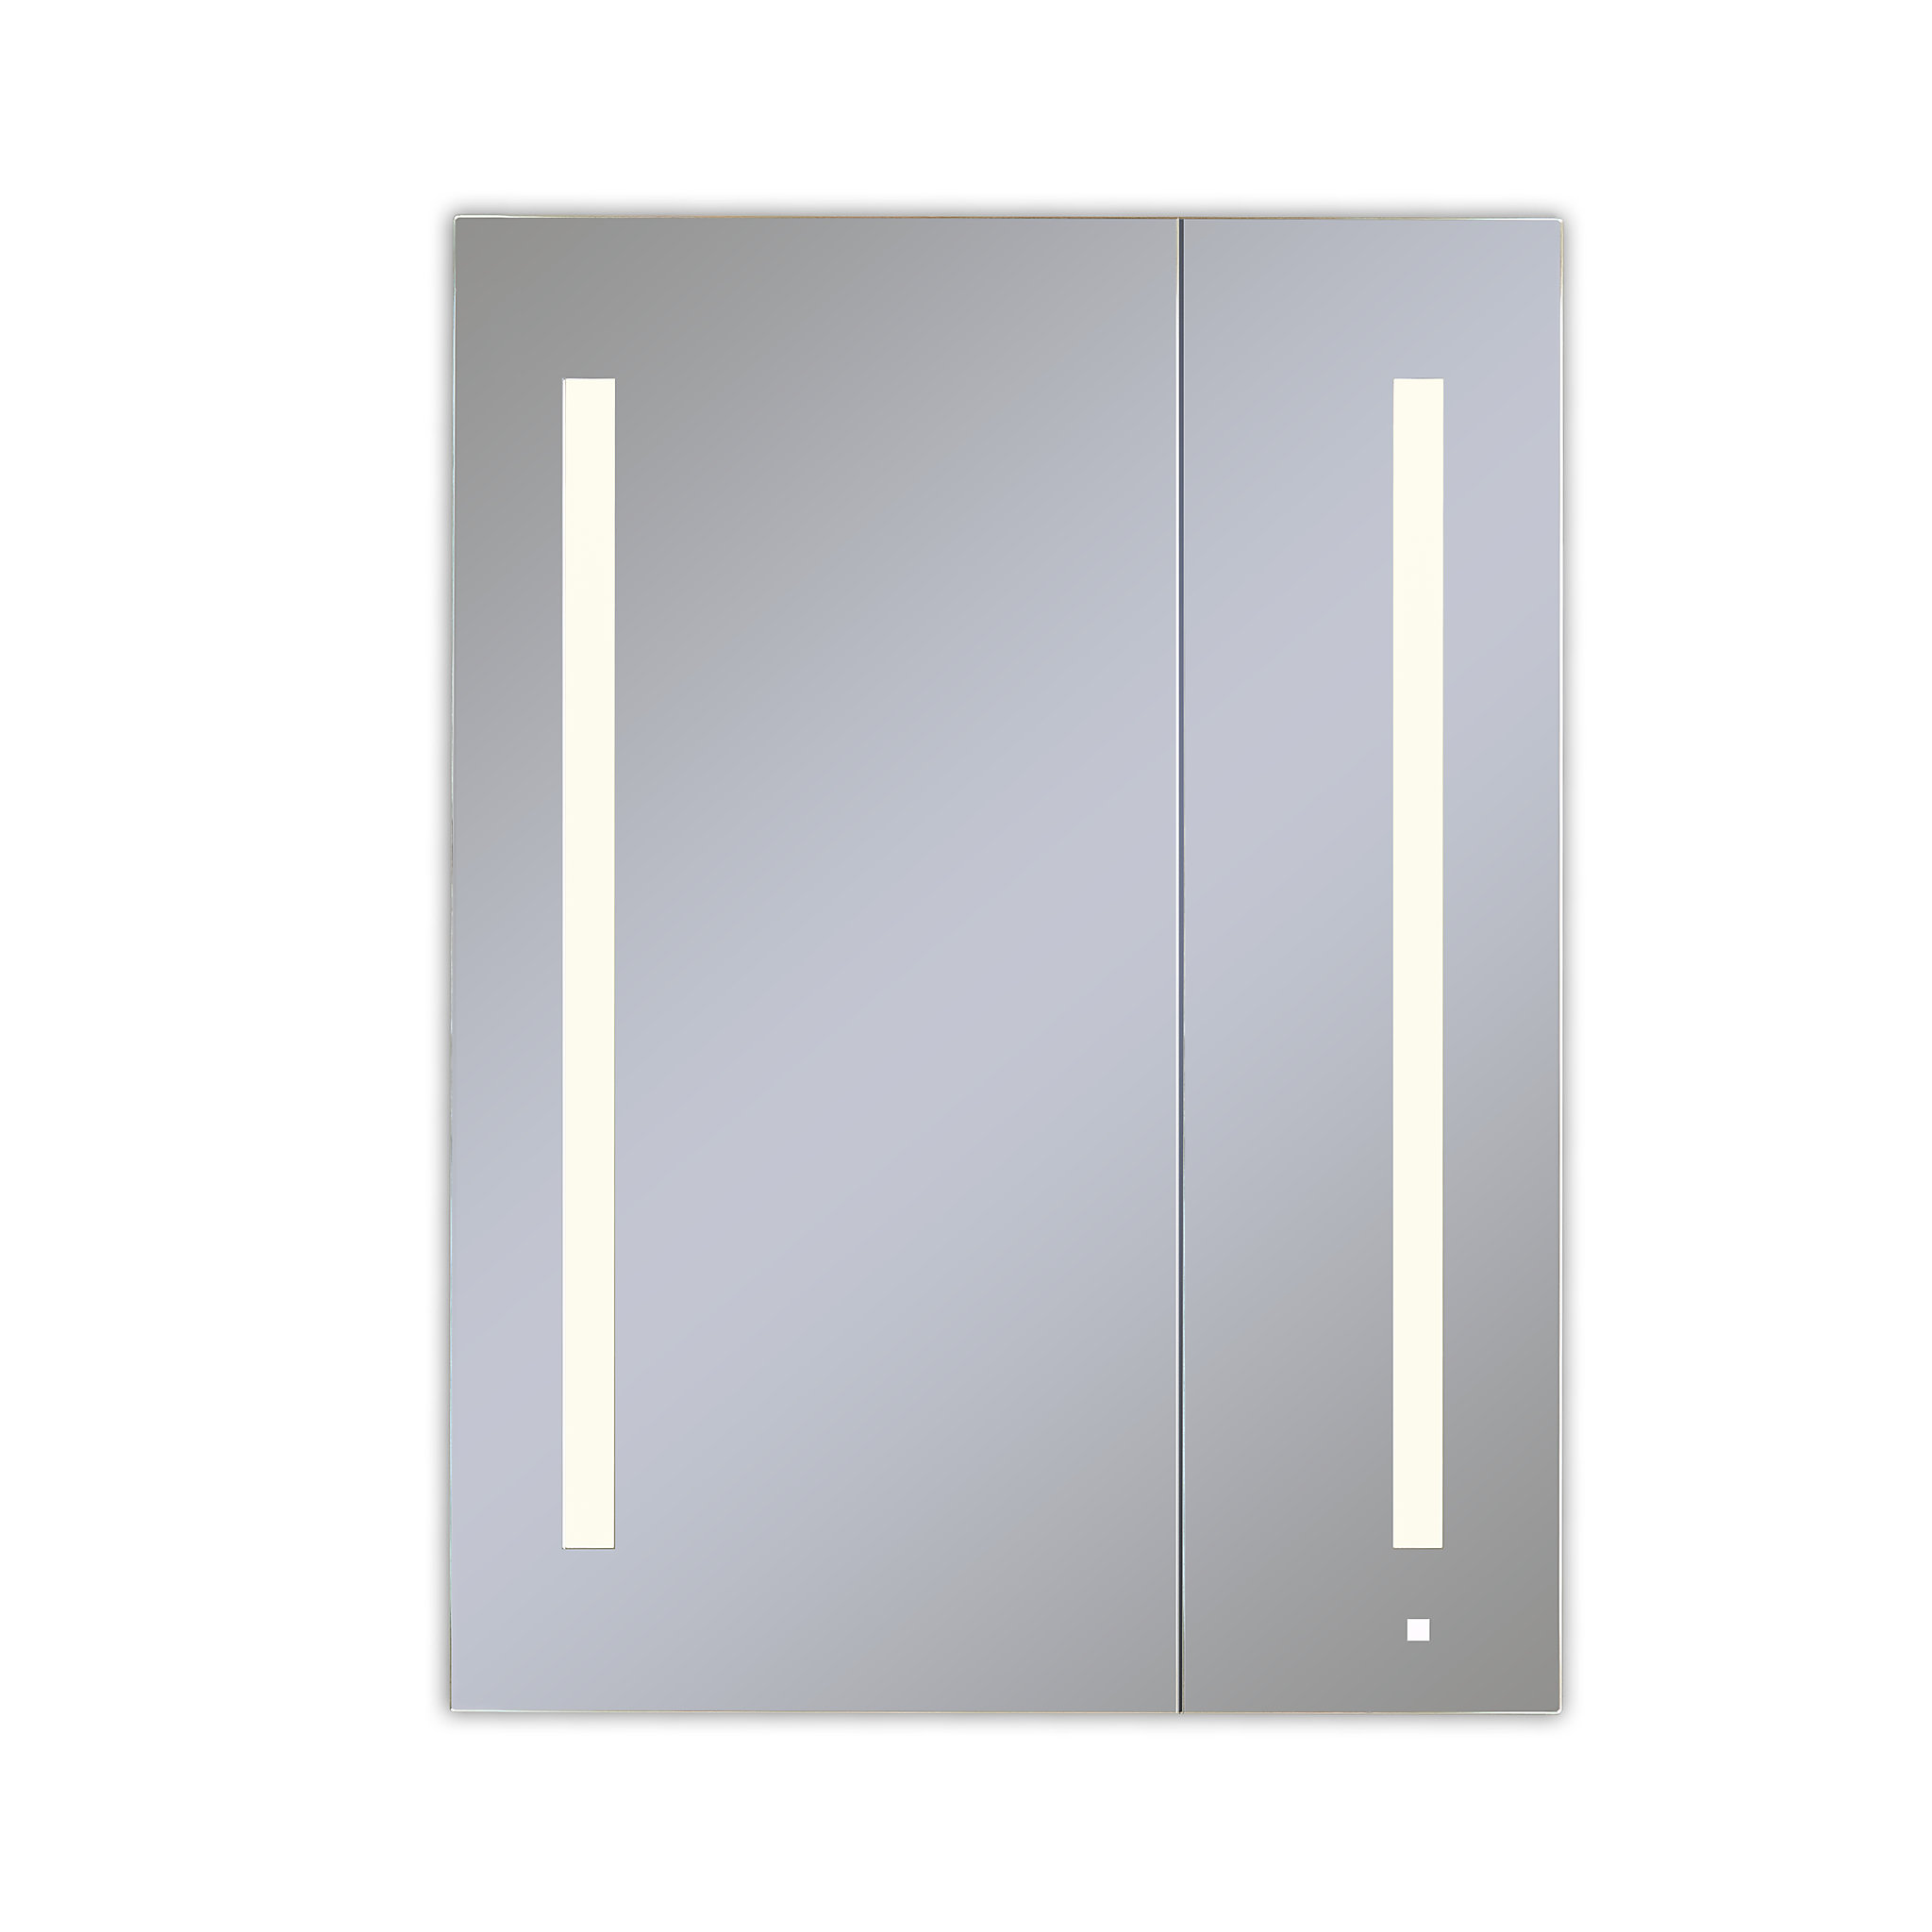 Robern AC3040D4P2LW AiO Lighted Cabinet, 30" x 40" x 4", Two Door, LUM Lighting, 2700K Temperature (Warm Light), Dimmable, Elect